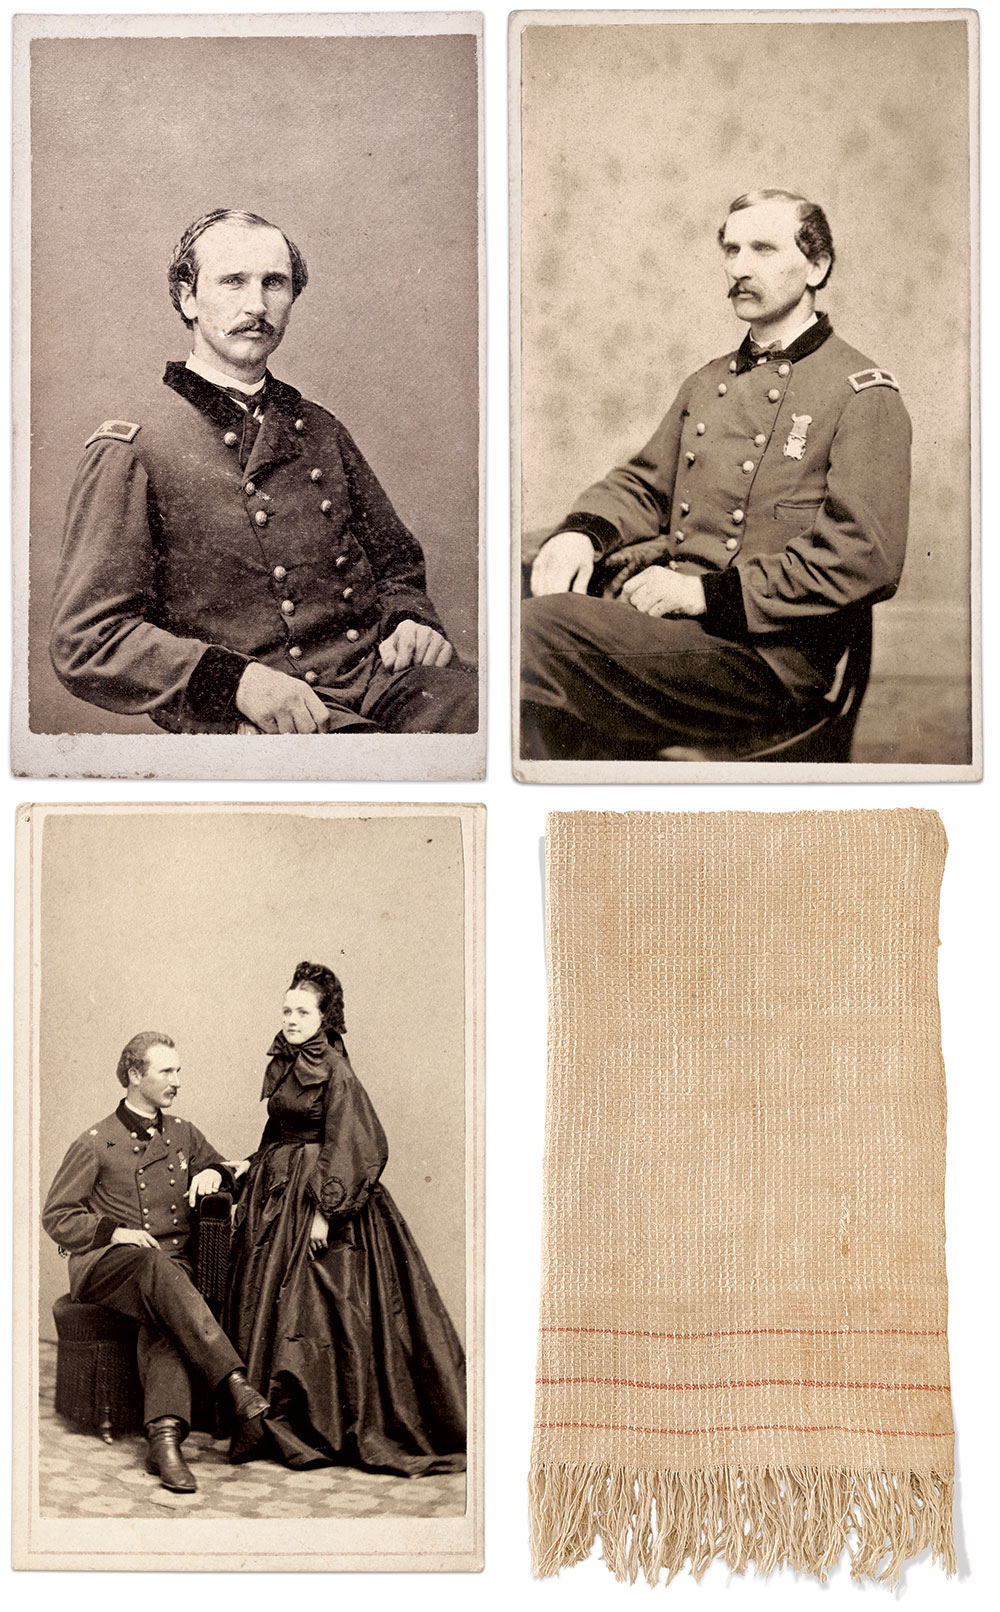 Clockwise from bottom left: Whitaker posed with his wife, Theodosia (carte de visite by John Goldin & Co. of  Washington, D.C. Buck Zaidel Collection); Whitaker pictured as a brevet brigadier general, circa 1865 (carte de visite by an unidentified photographer. Buck Zaidel Collection.); Whitaker wearing the unique medal honoring his service with Custer (carte de visite by William A. Beers and Sereno Mansfield of New Haven, Conn. The Liljenquist Family Collection at the Library of Congress.); Custer’s half of the flag of truce towel. National Museum of History.